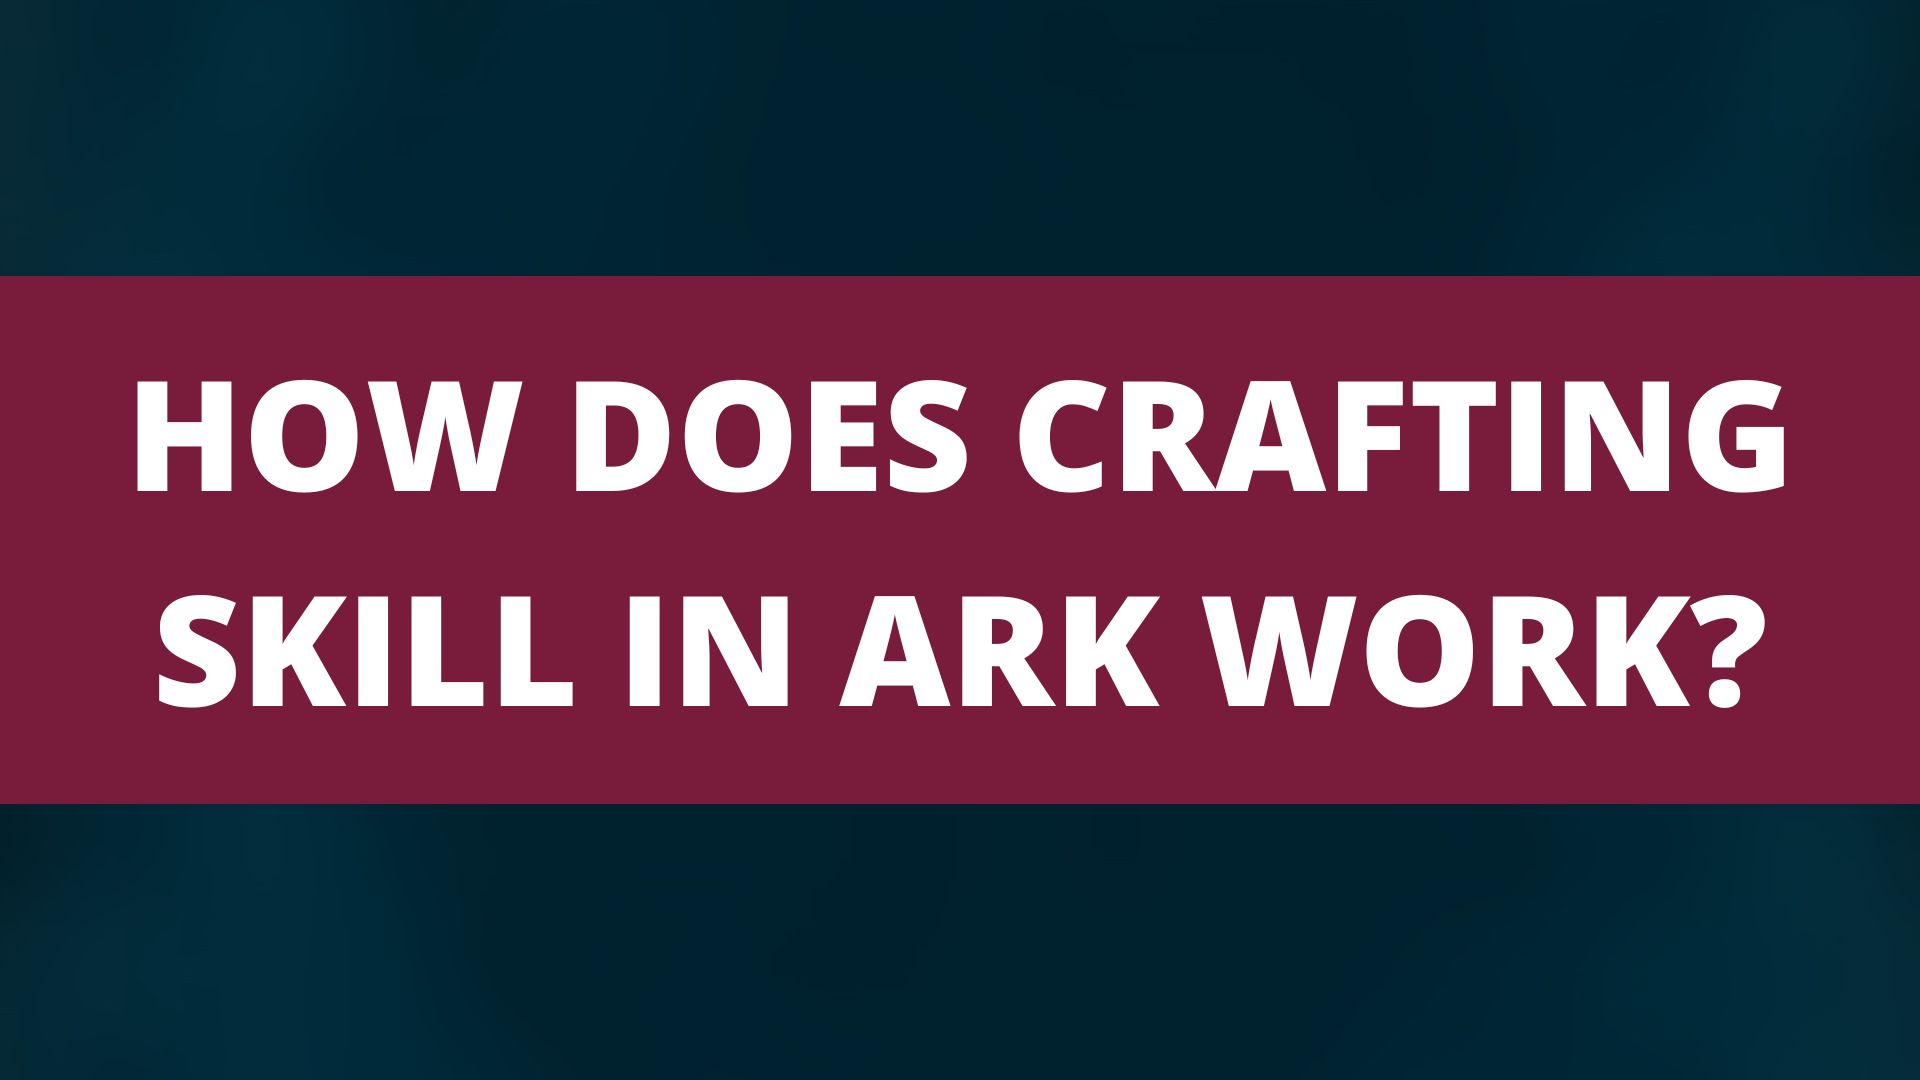 HOW DOES CRAFTING SKILL IN ARK WORK